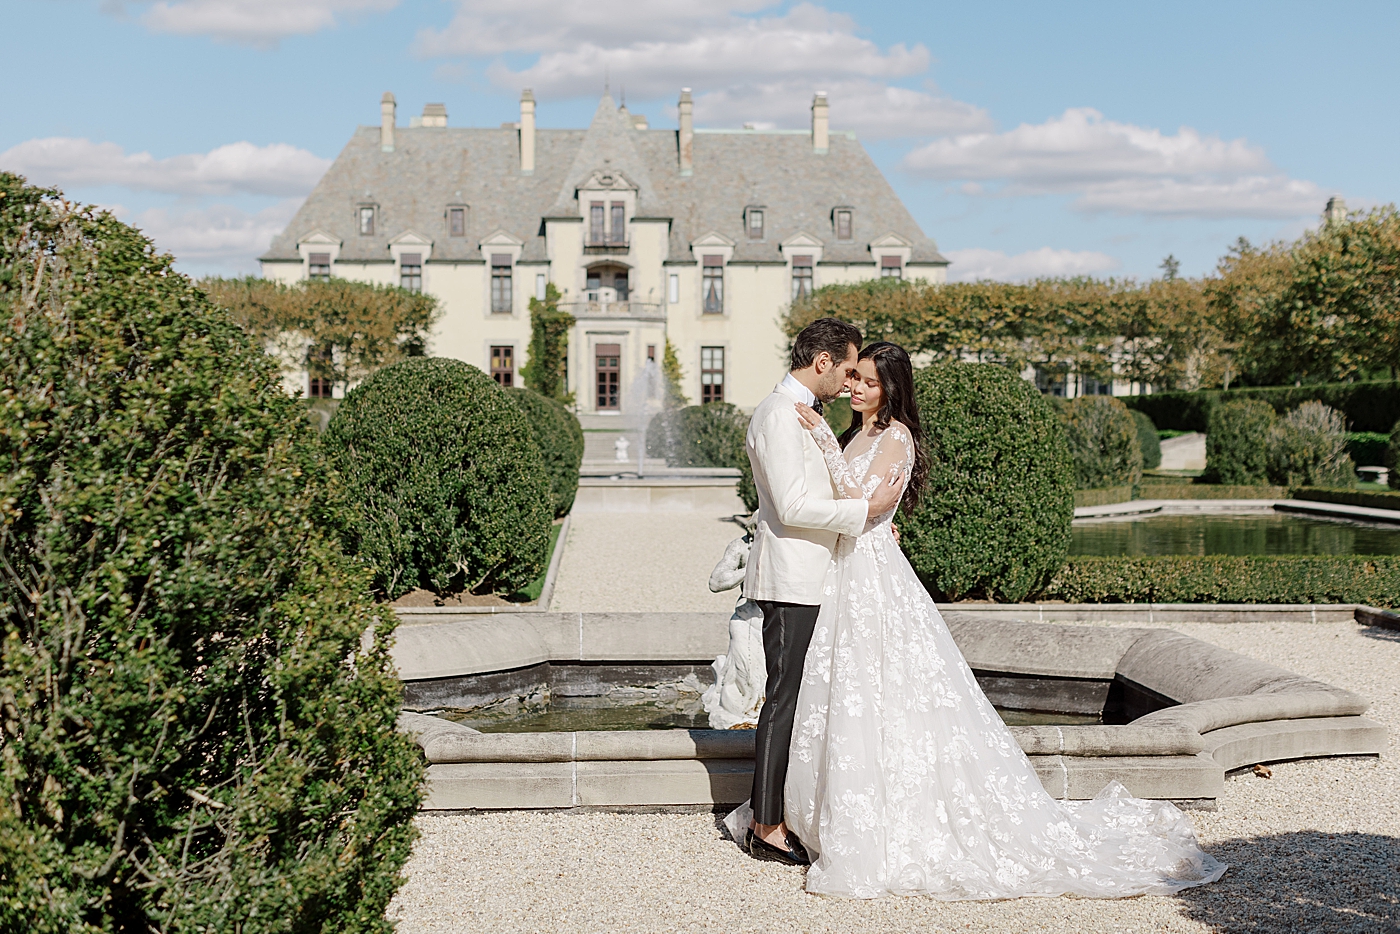 Image of a bride and groom embracing in a European garden during Oheka castle wedding | Image by Hope Helmuth Photography